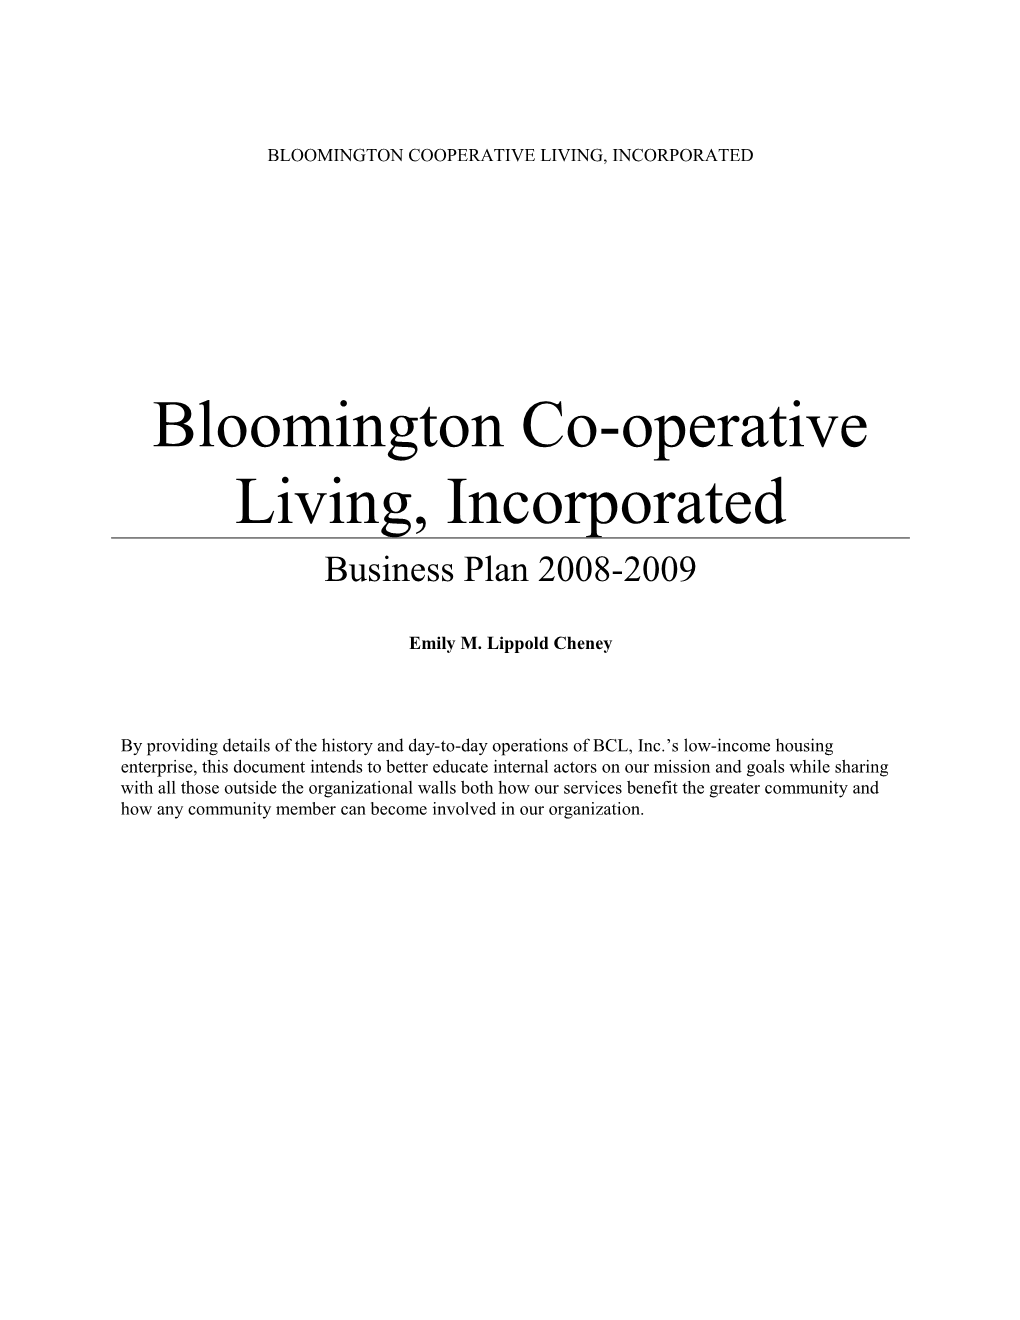 Bloomington Co-Operative Living, Incorporated